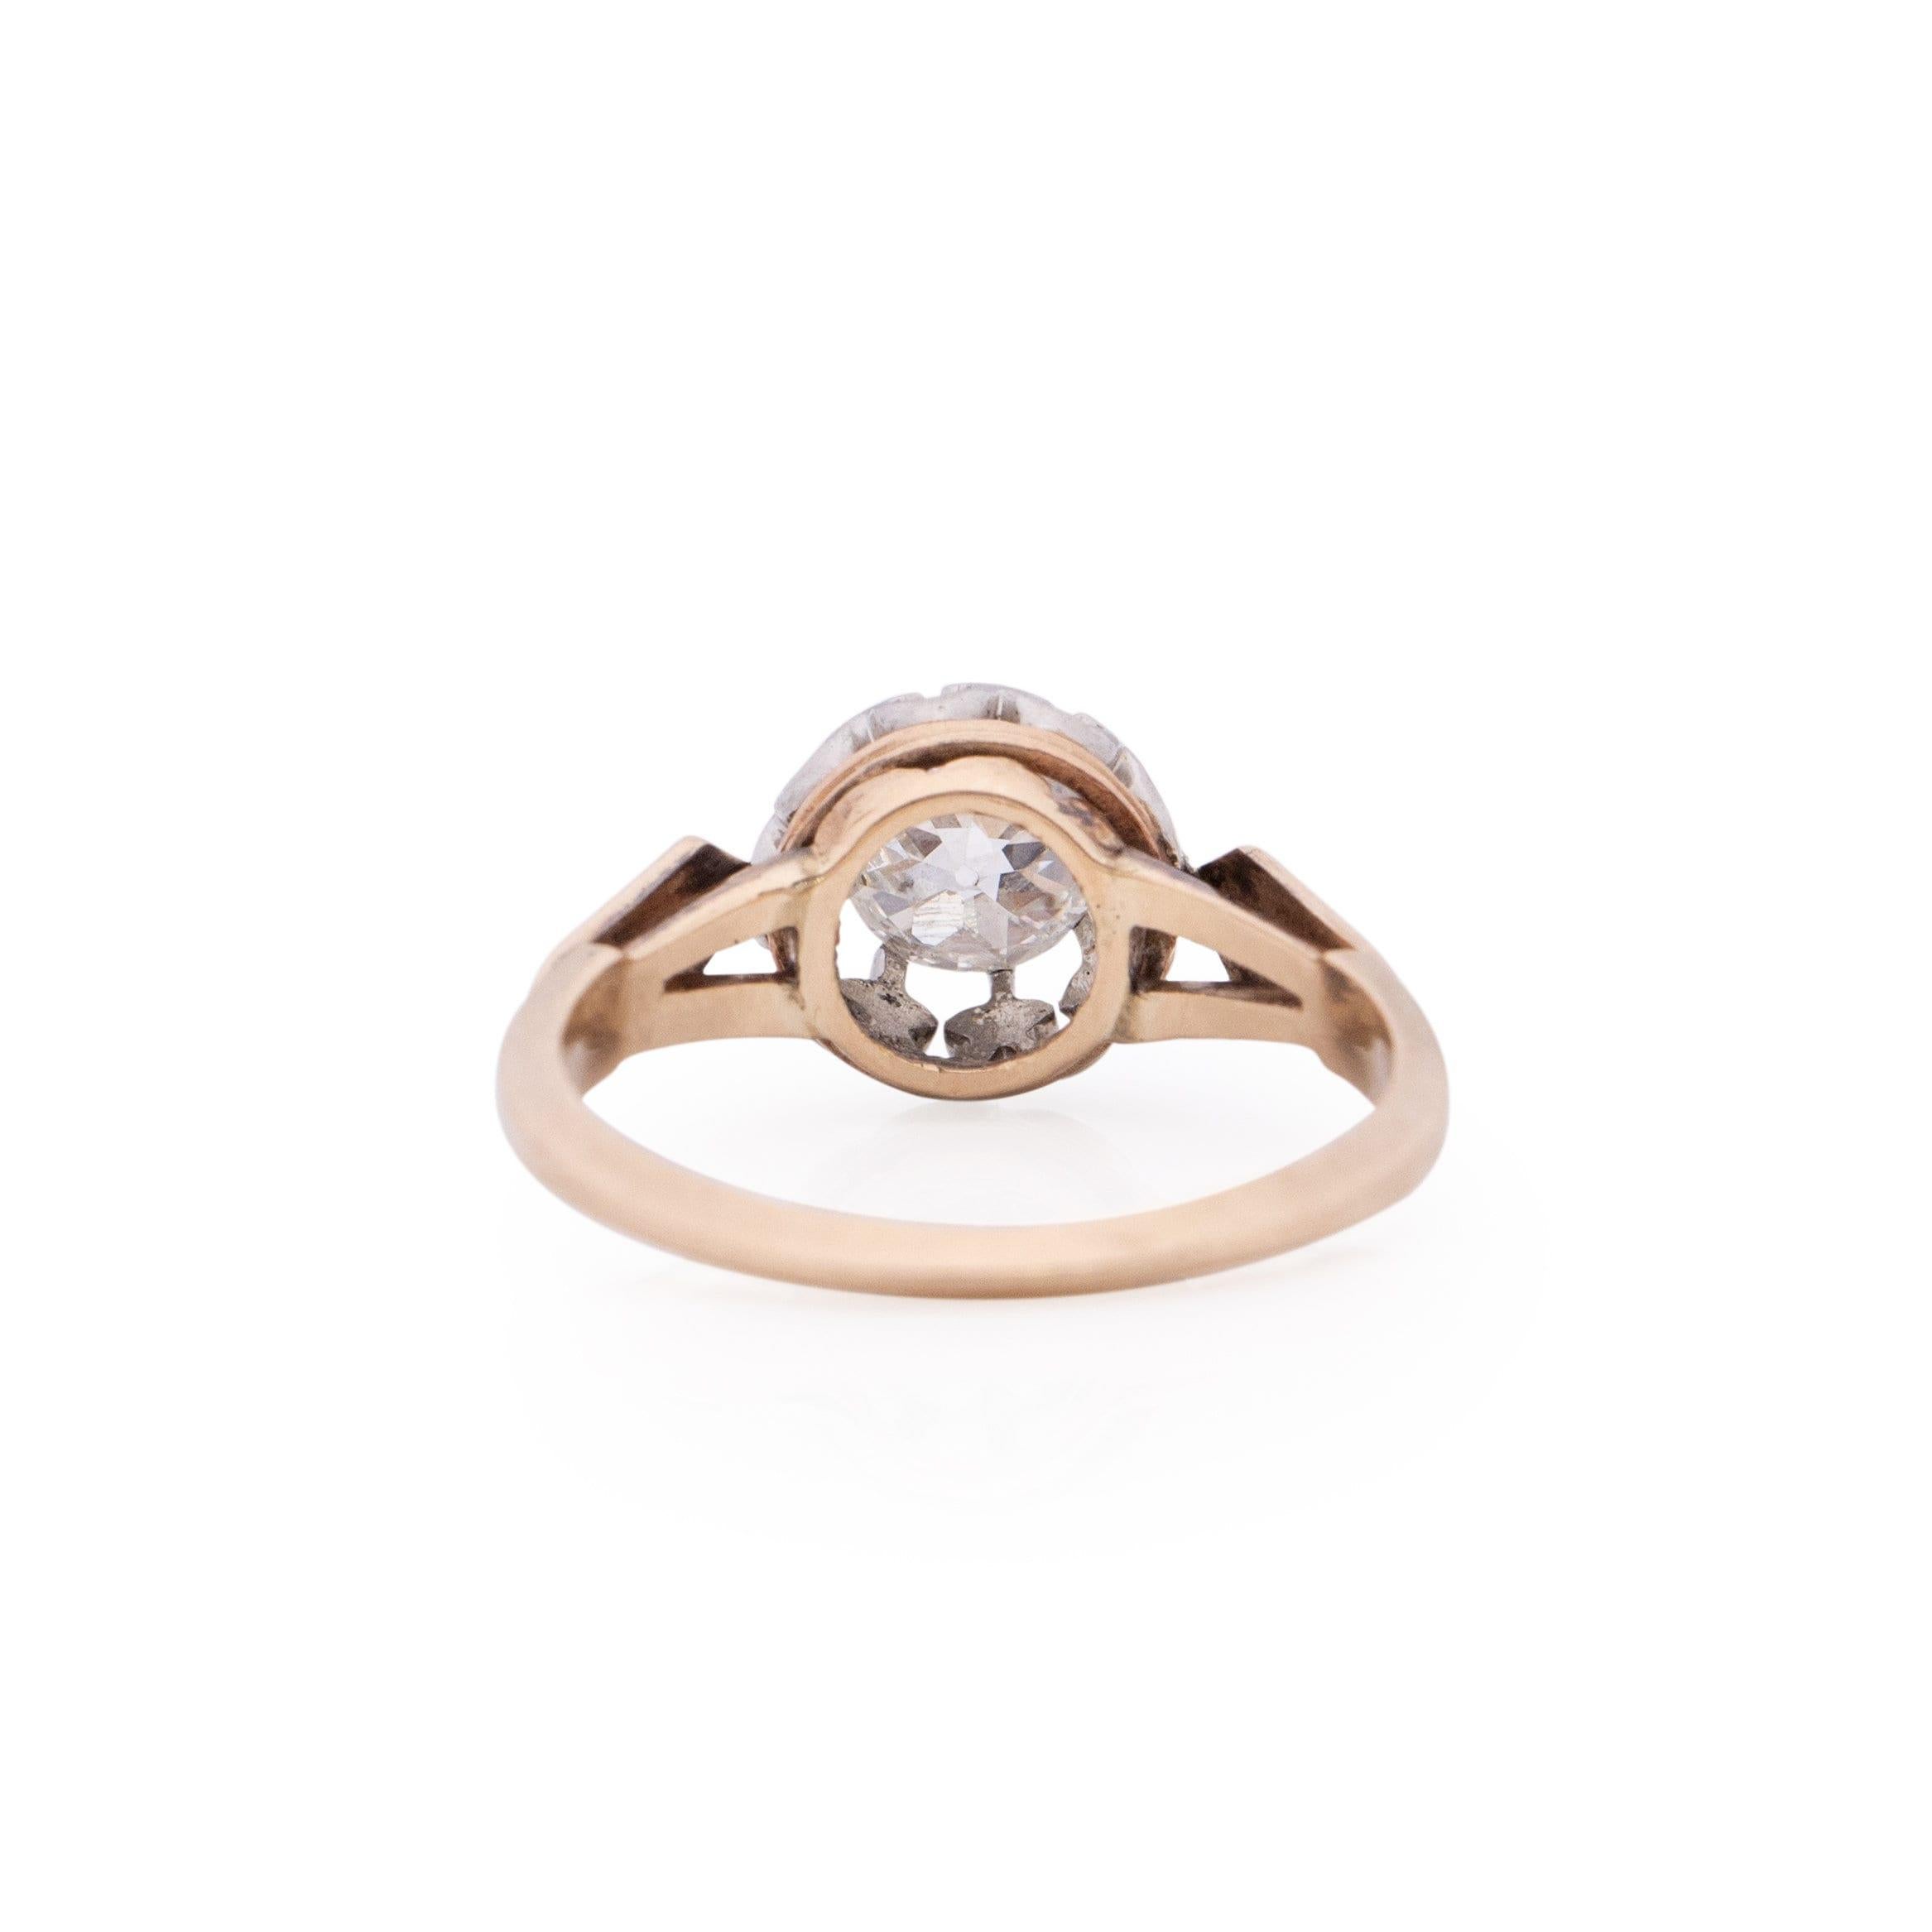 Taille vieille Europe Bague solitaire 